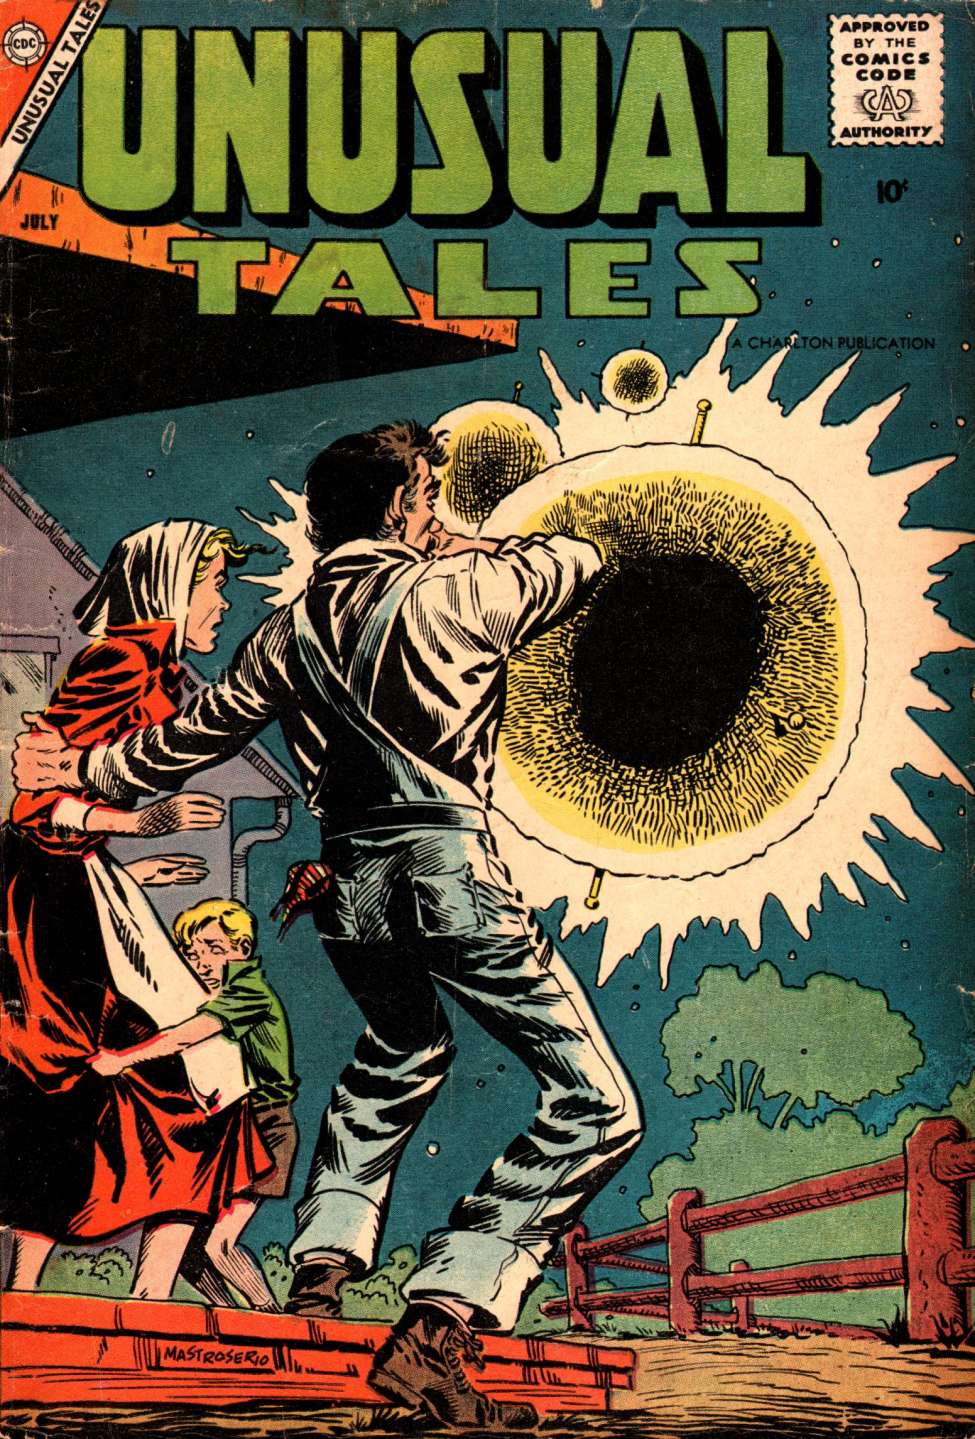 Book Cover For Unusual Tales 12